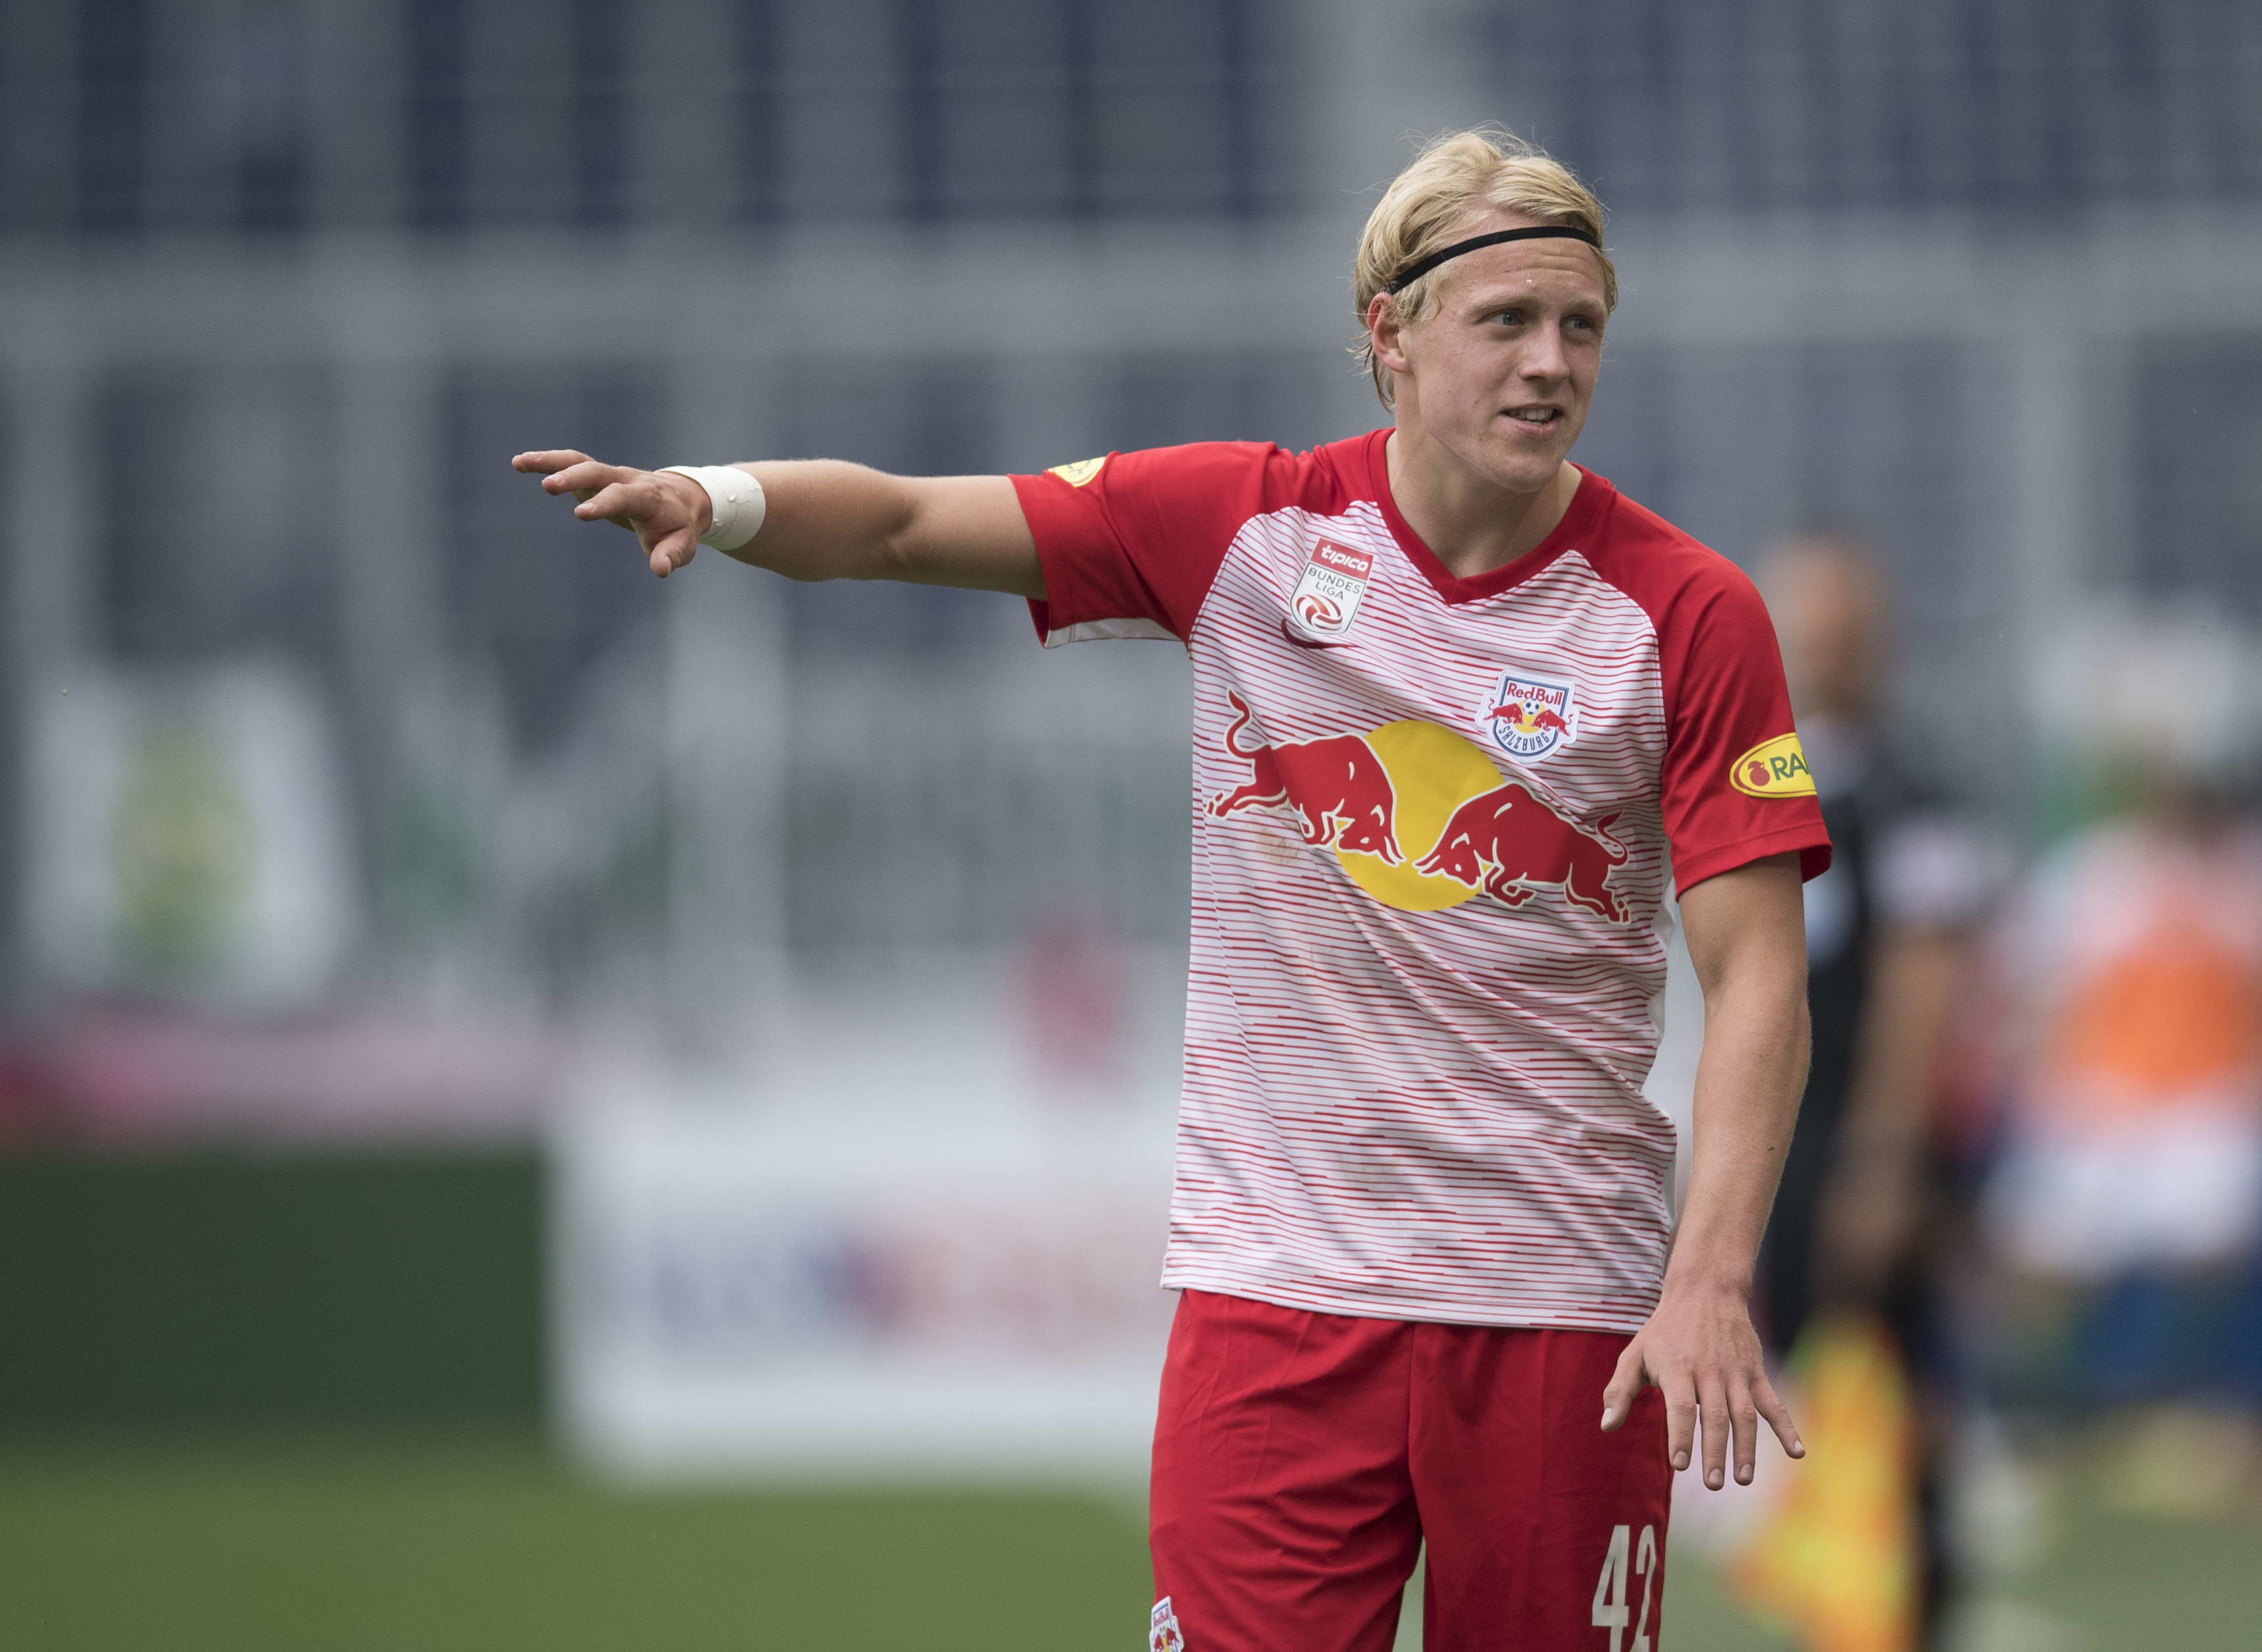 SALZBURG, AUSTRIA - MAY 20: Xaver Schlager of Salzburg during the tipico Bundesliga match between RB Salzburg and SV Mattersburg at Red Bull Arena on May 20, 2018 in Salzburg, Austria. (Photo by Andreas Schaad/Bongarts/Getty Images)